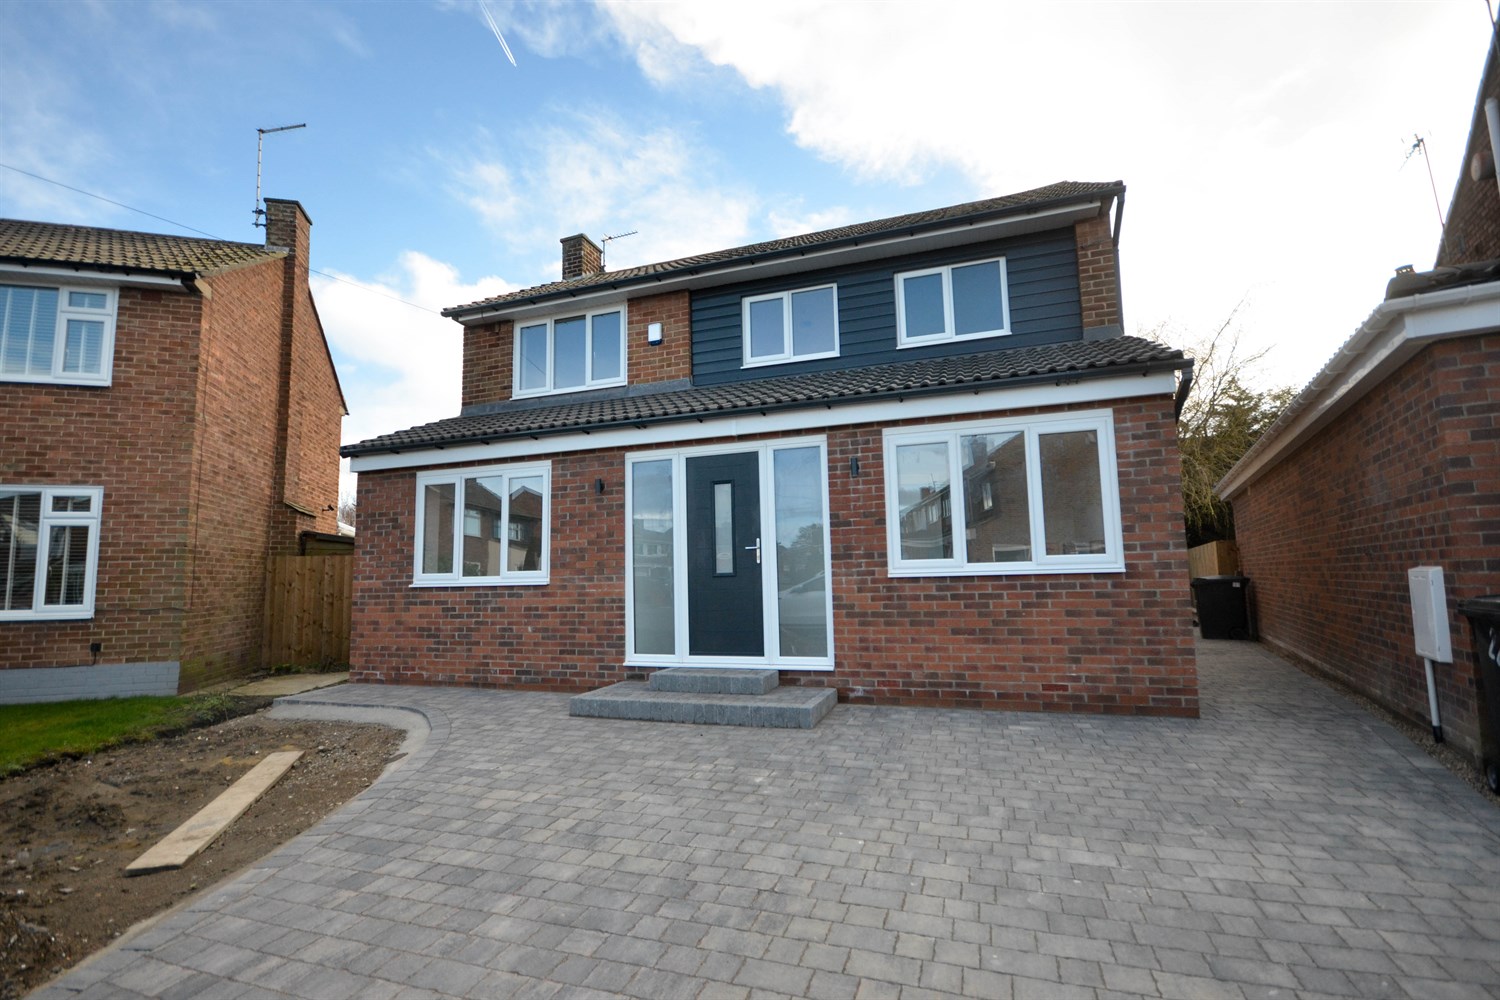 3 bed detached house for sale in Moorfield Gardens, Cleadon - Property Image 1